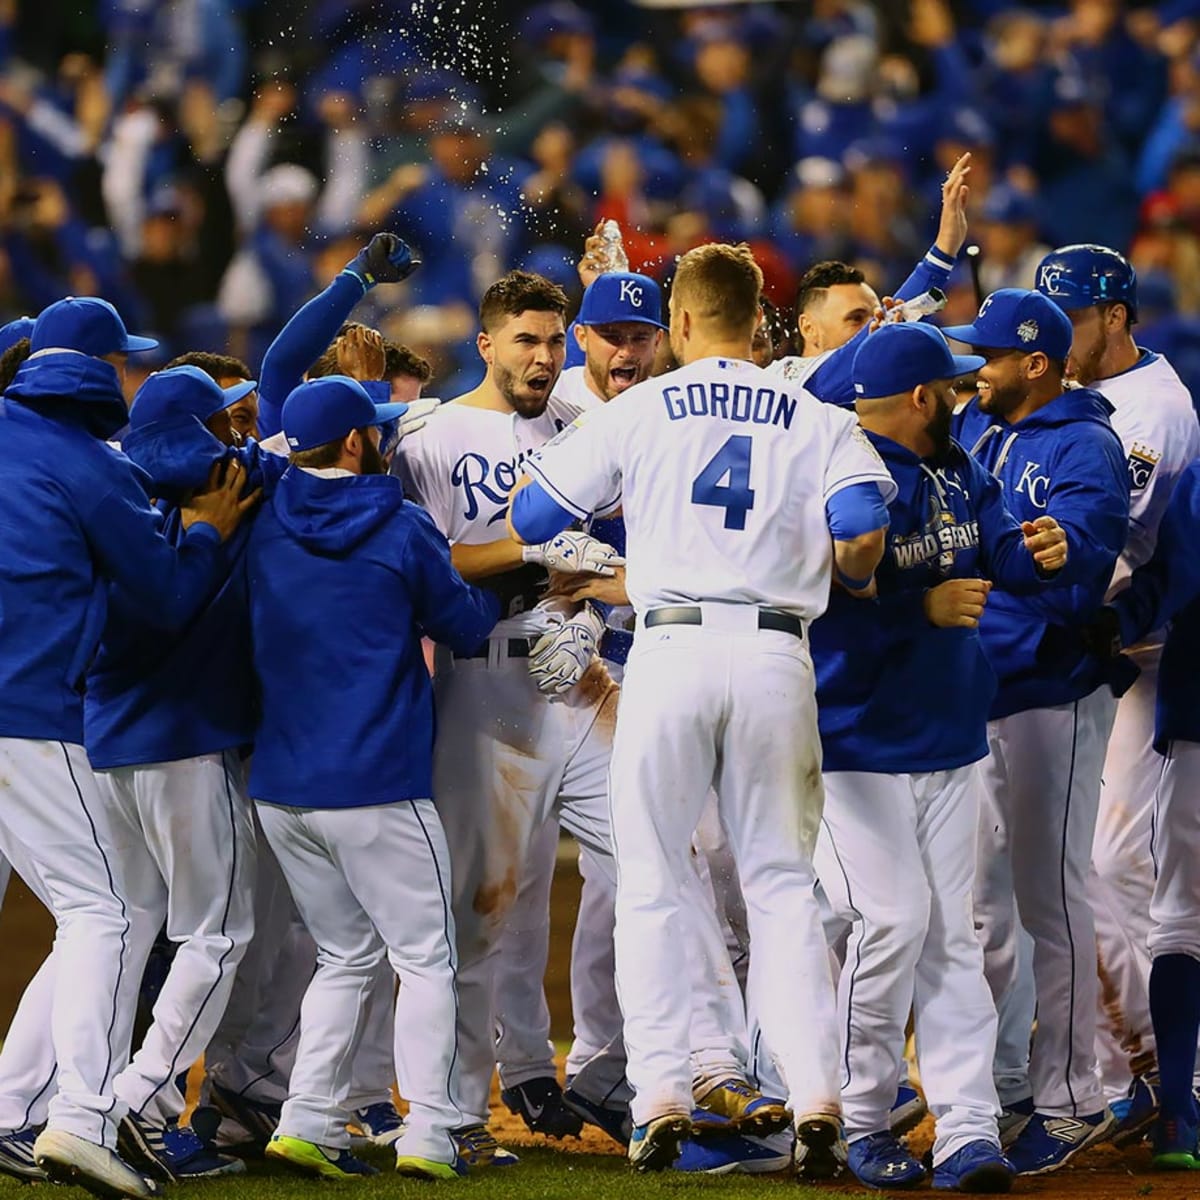 AL clinches home field in 2014 World Series with 5-3 win in All